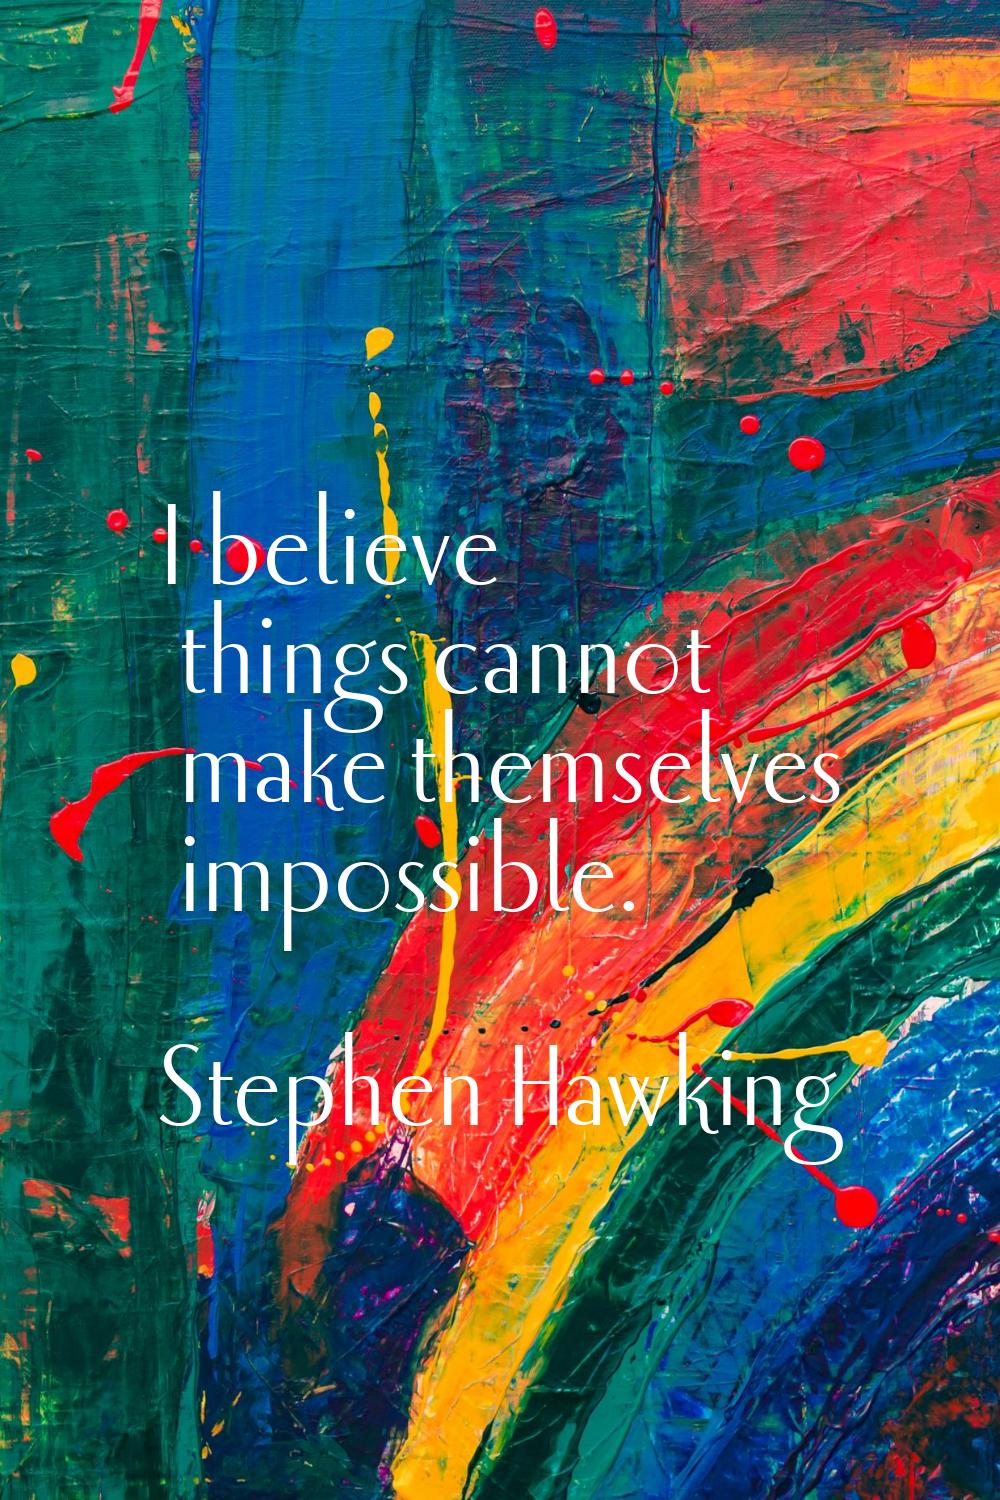 I believe things cannot make themselves impossible.